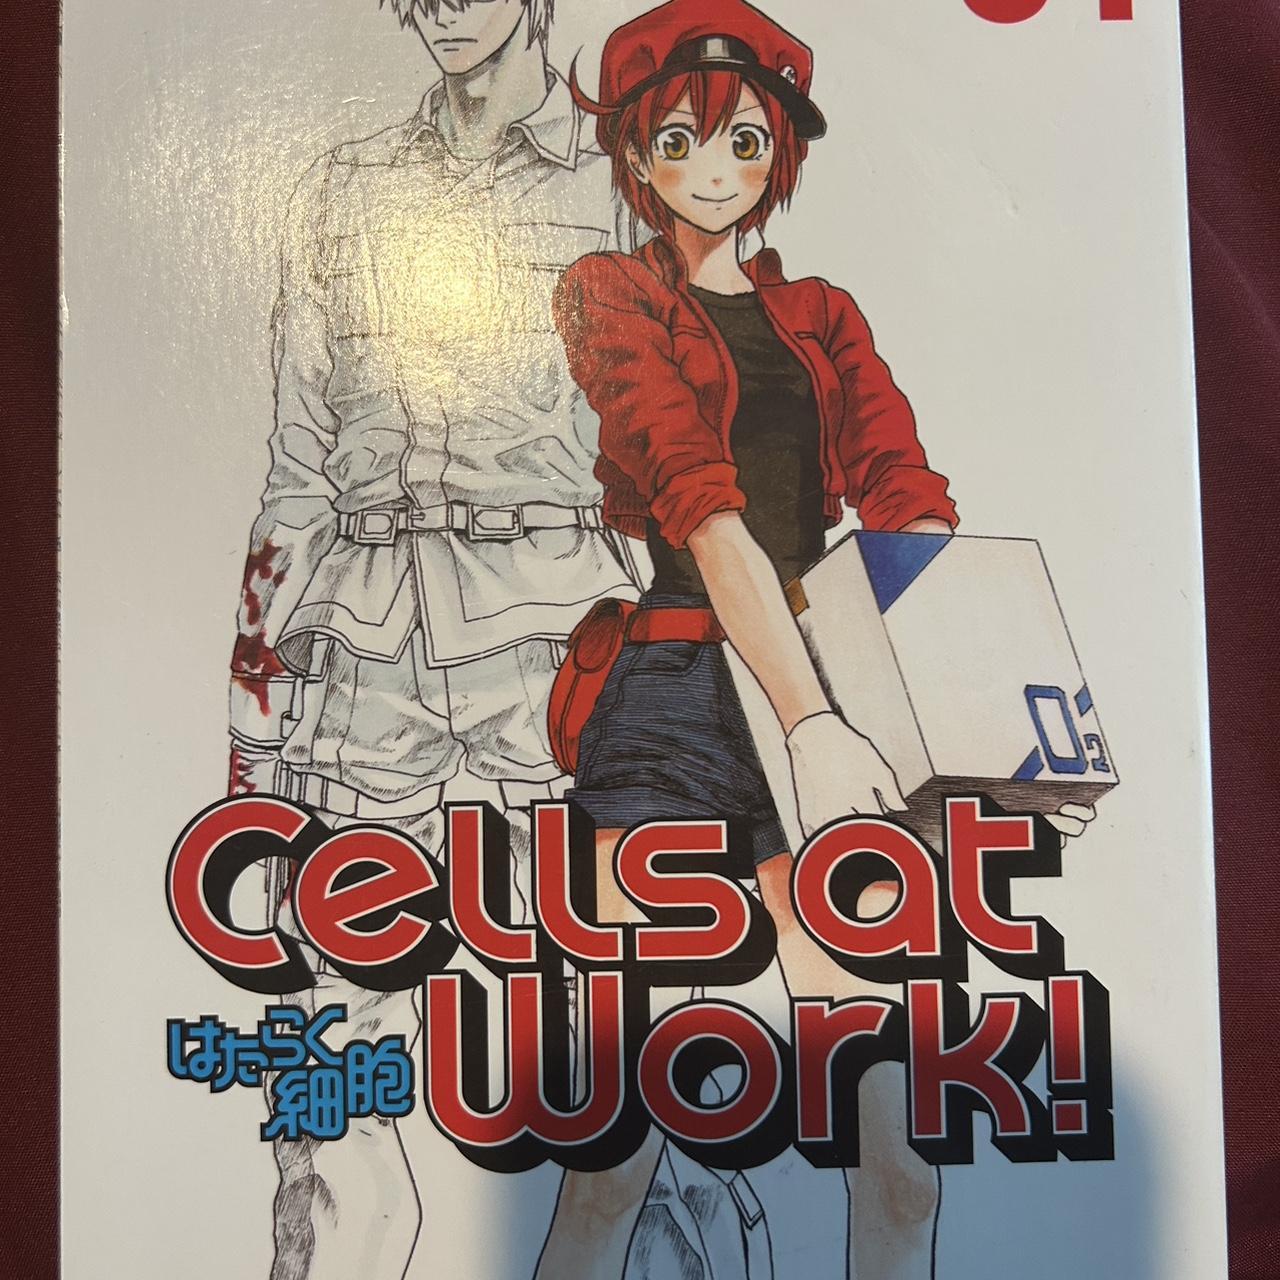 Cells at work! Vol. 1 /